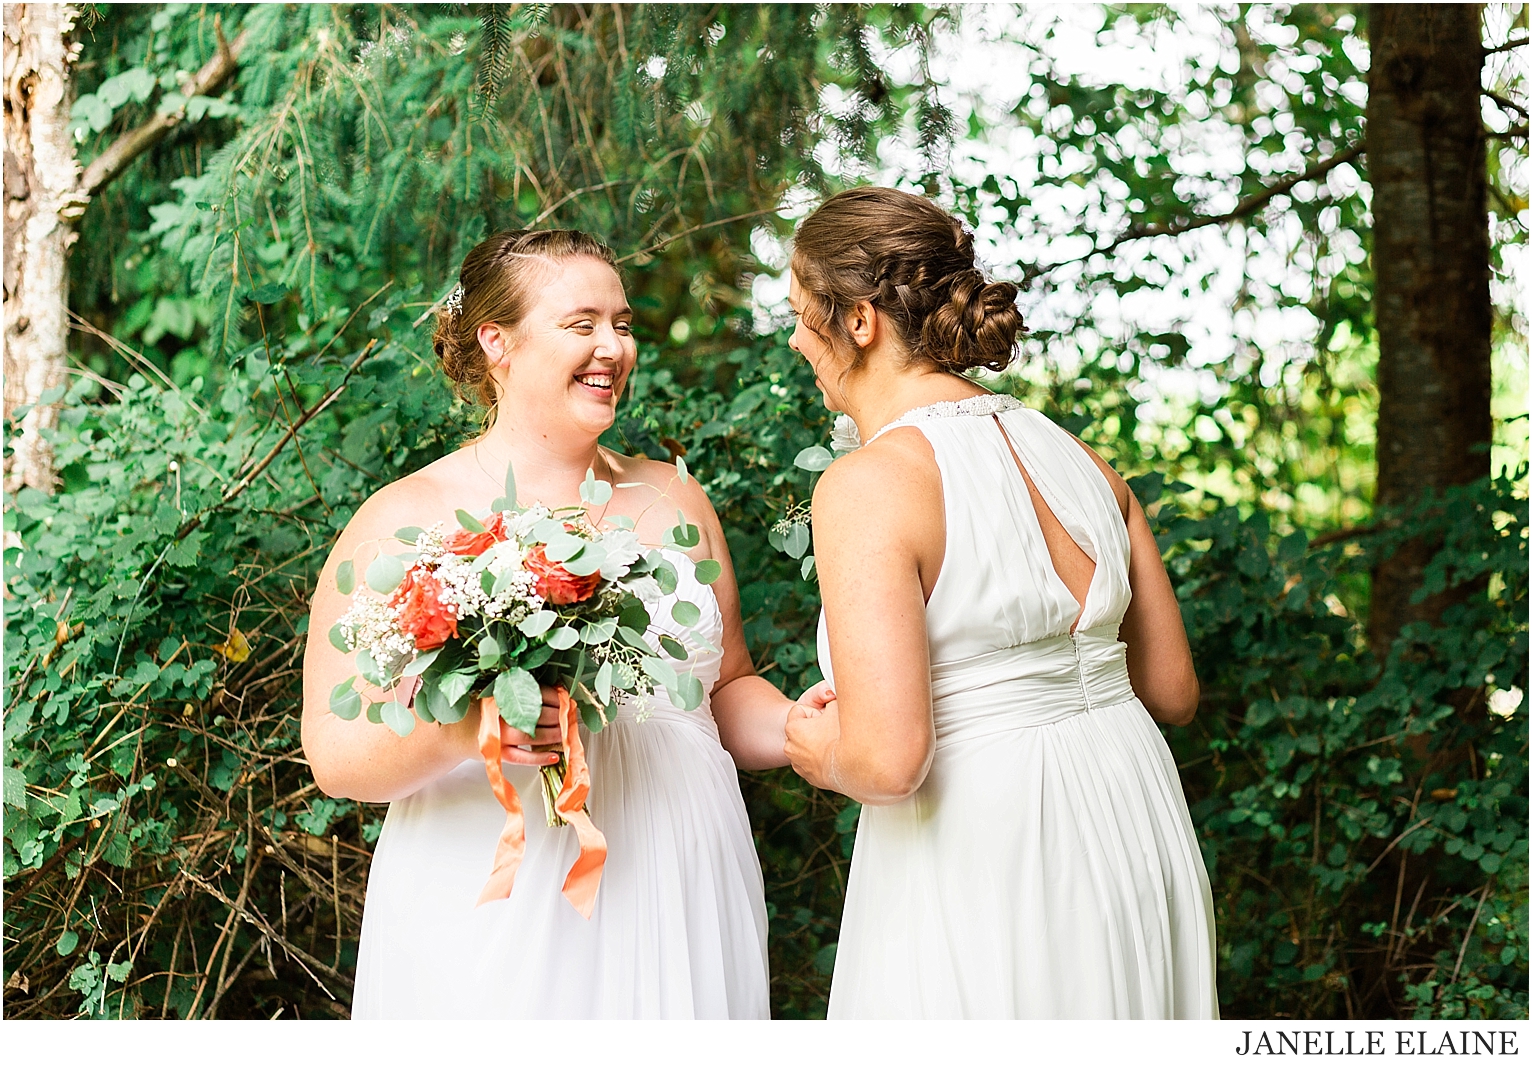 liz and christina lanning-first look and portraits-luther burbank park-janelle elaine photography-32.jpg